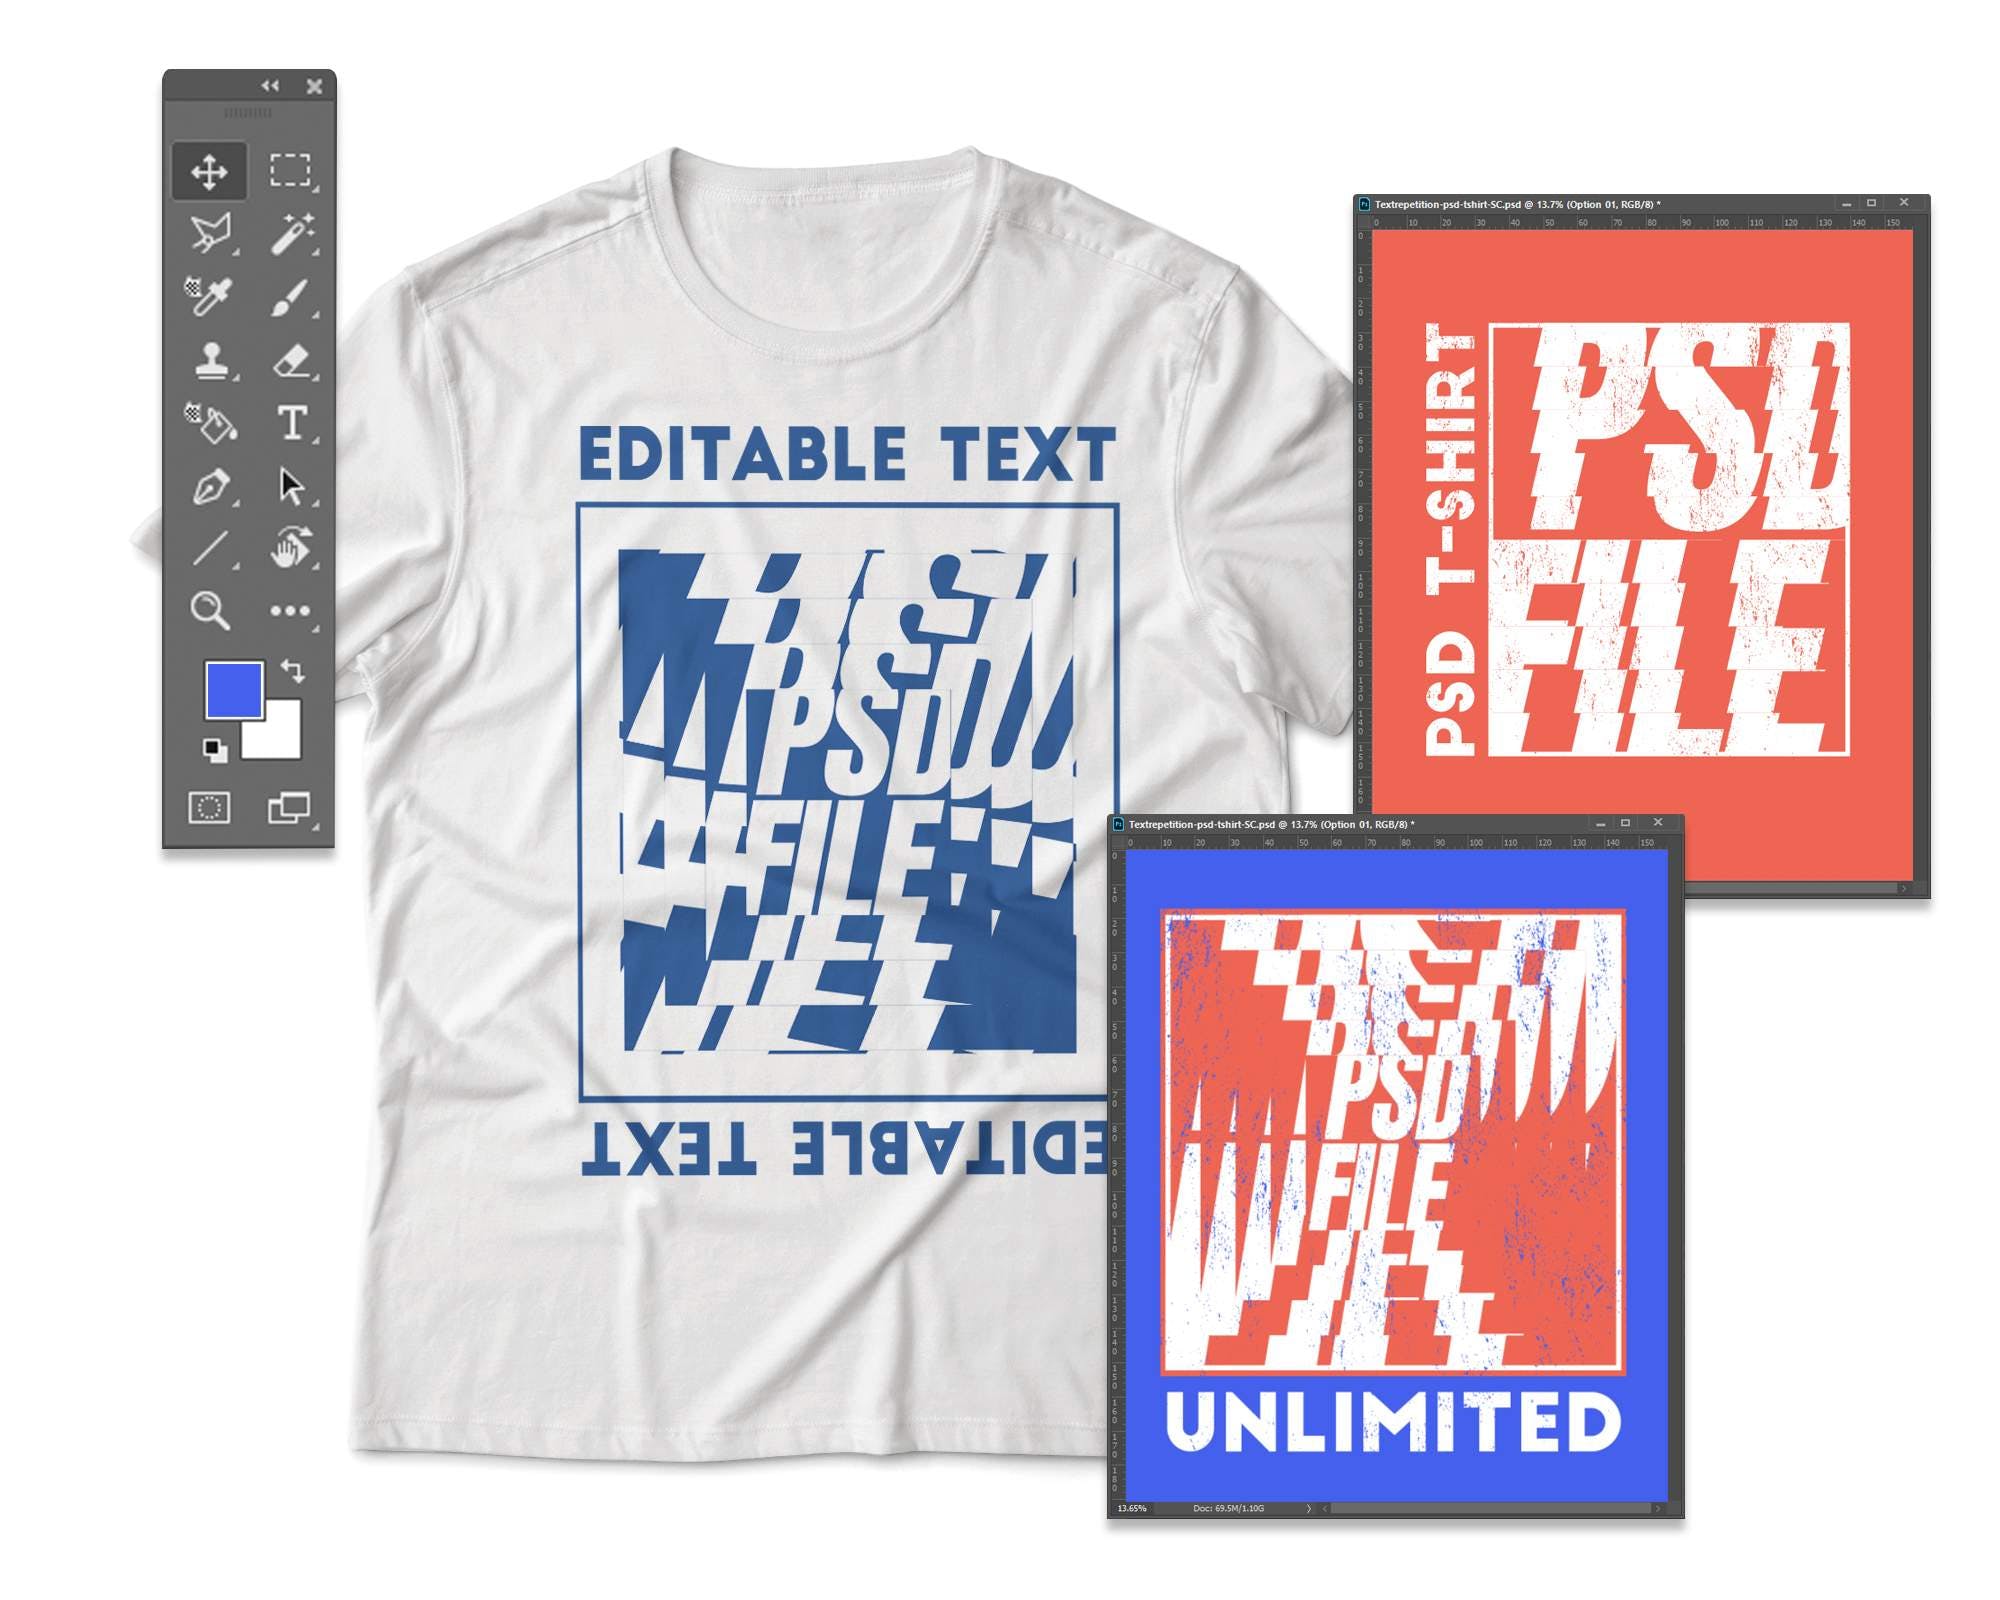 t-shirt design template with photoshop tools